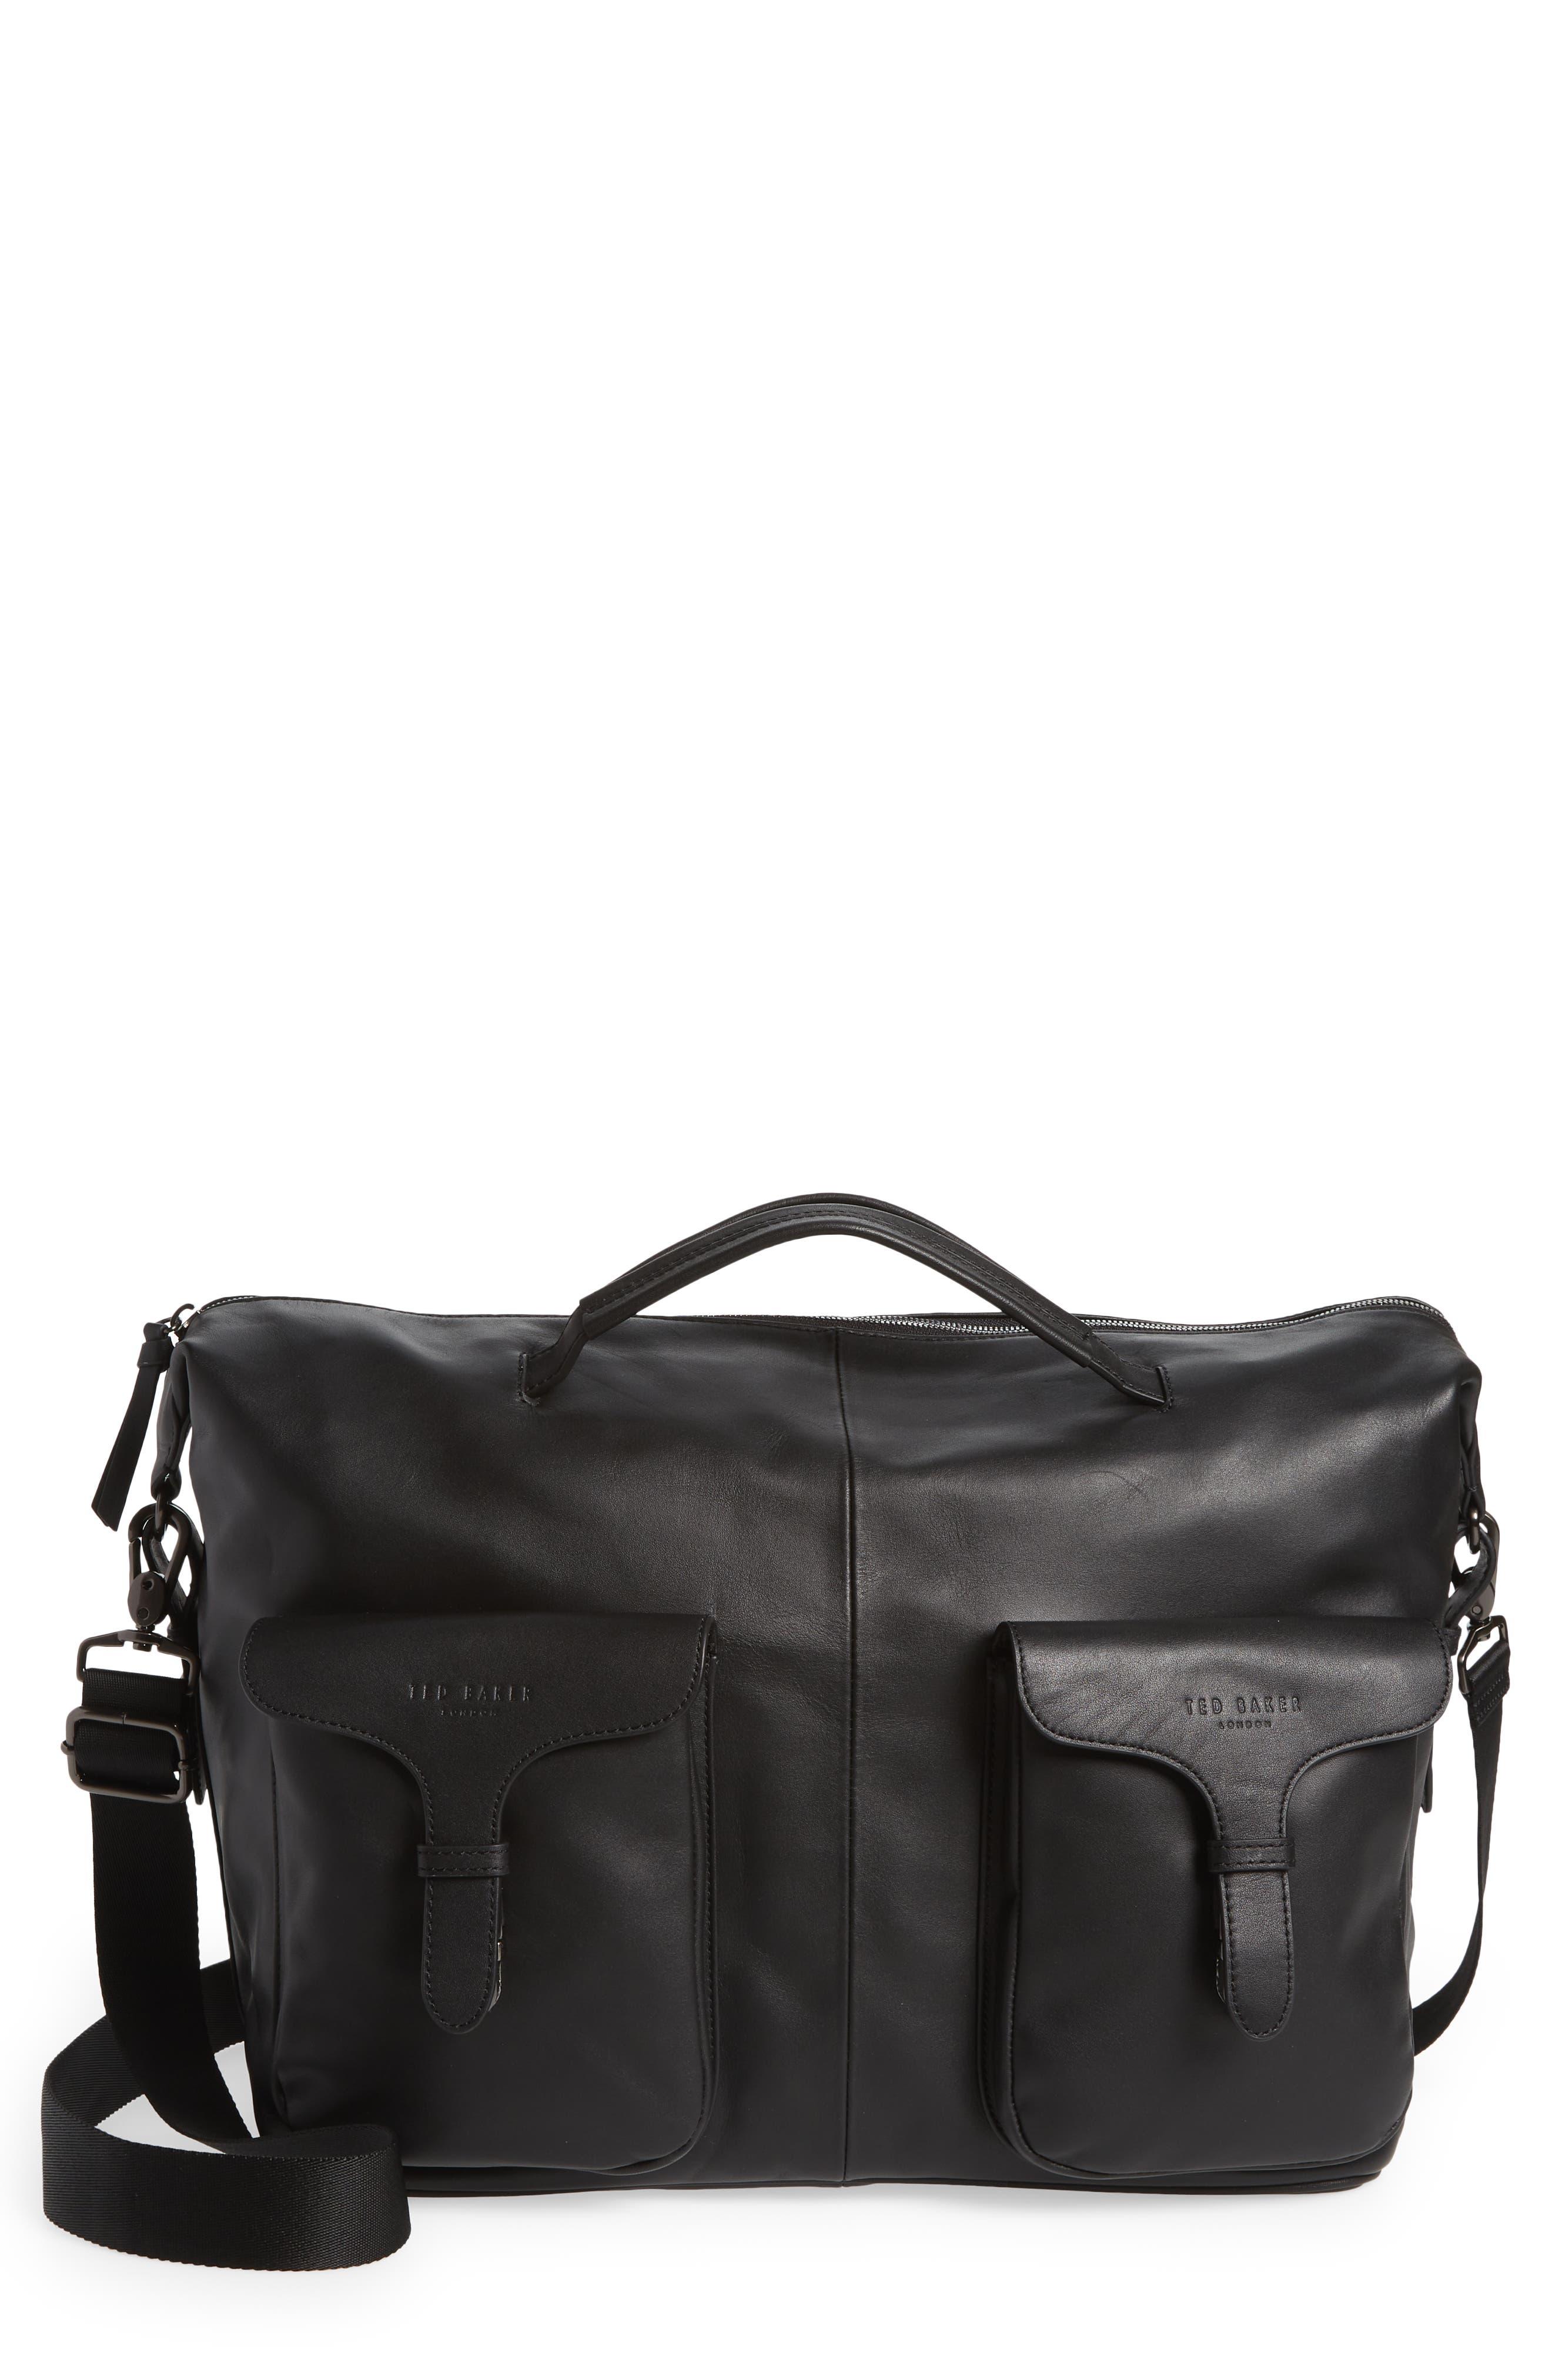 Ted Baker Cillian Leather Holdall Duffle Bag In Black At Nordstrom Rack ...